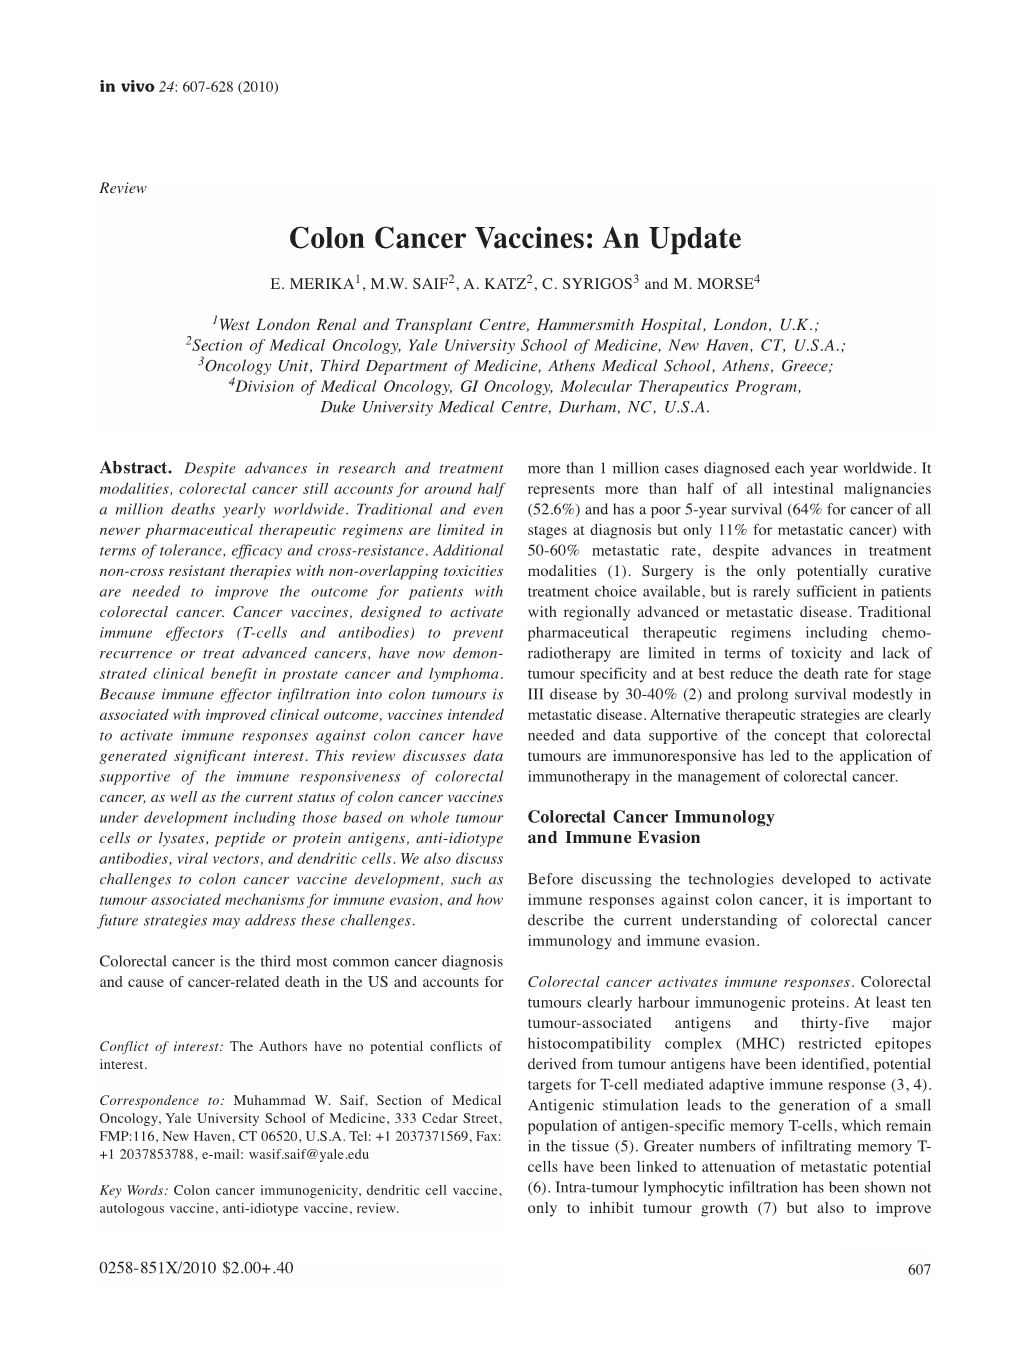 Colon Cancer Vaccines: an Update